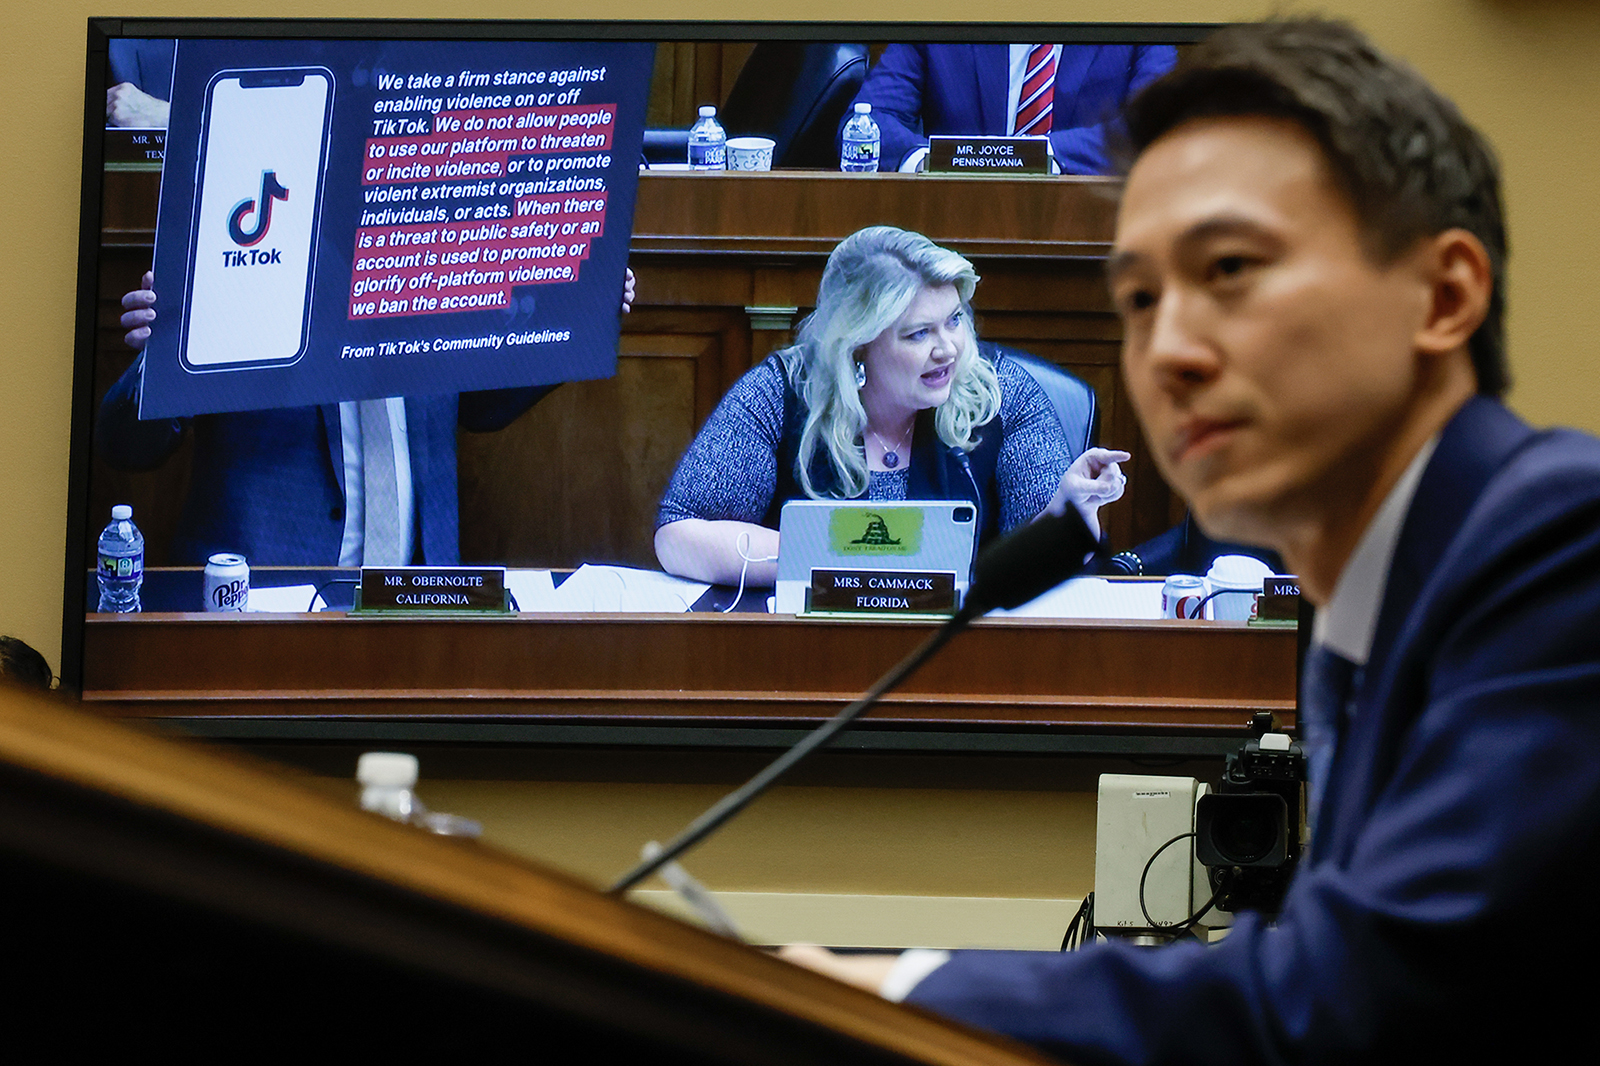 TikTok CEO Shou Zi Chew takes questions from Rep. Kat Cammack (R-FL) before the House Energy and Commerce Committee in the Rayburn House Office Building on Capitol Hill on March 23 in Washington, DC. The hearing was a rare opportunity for lawmakers to question the leader of the short-form social media video app about the company's relationship with its Chinese owner, ByteDance, and how they handle users' sensitive personal data. 